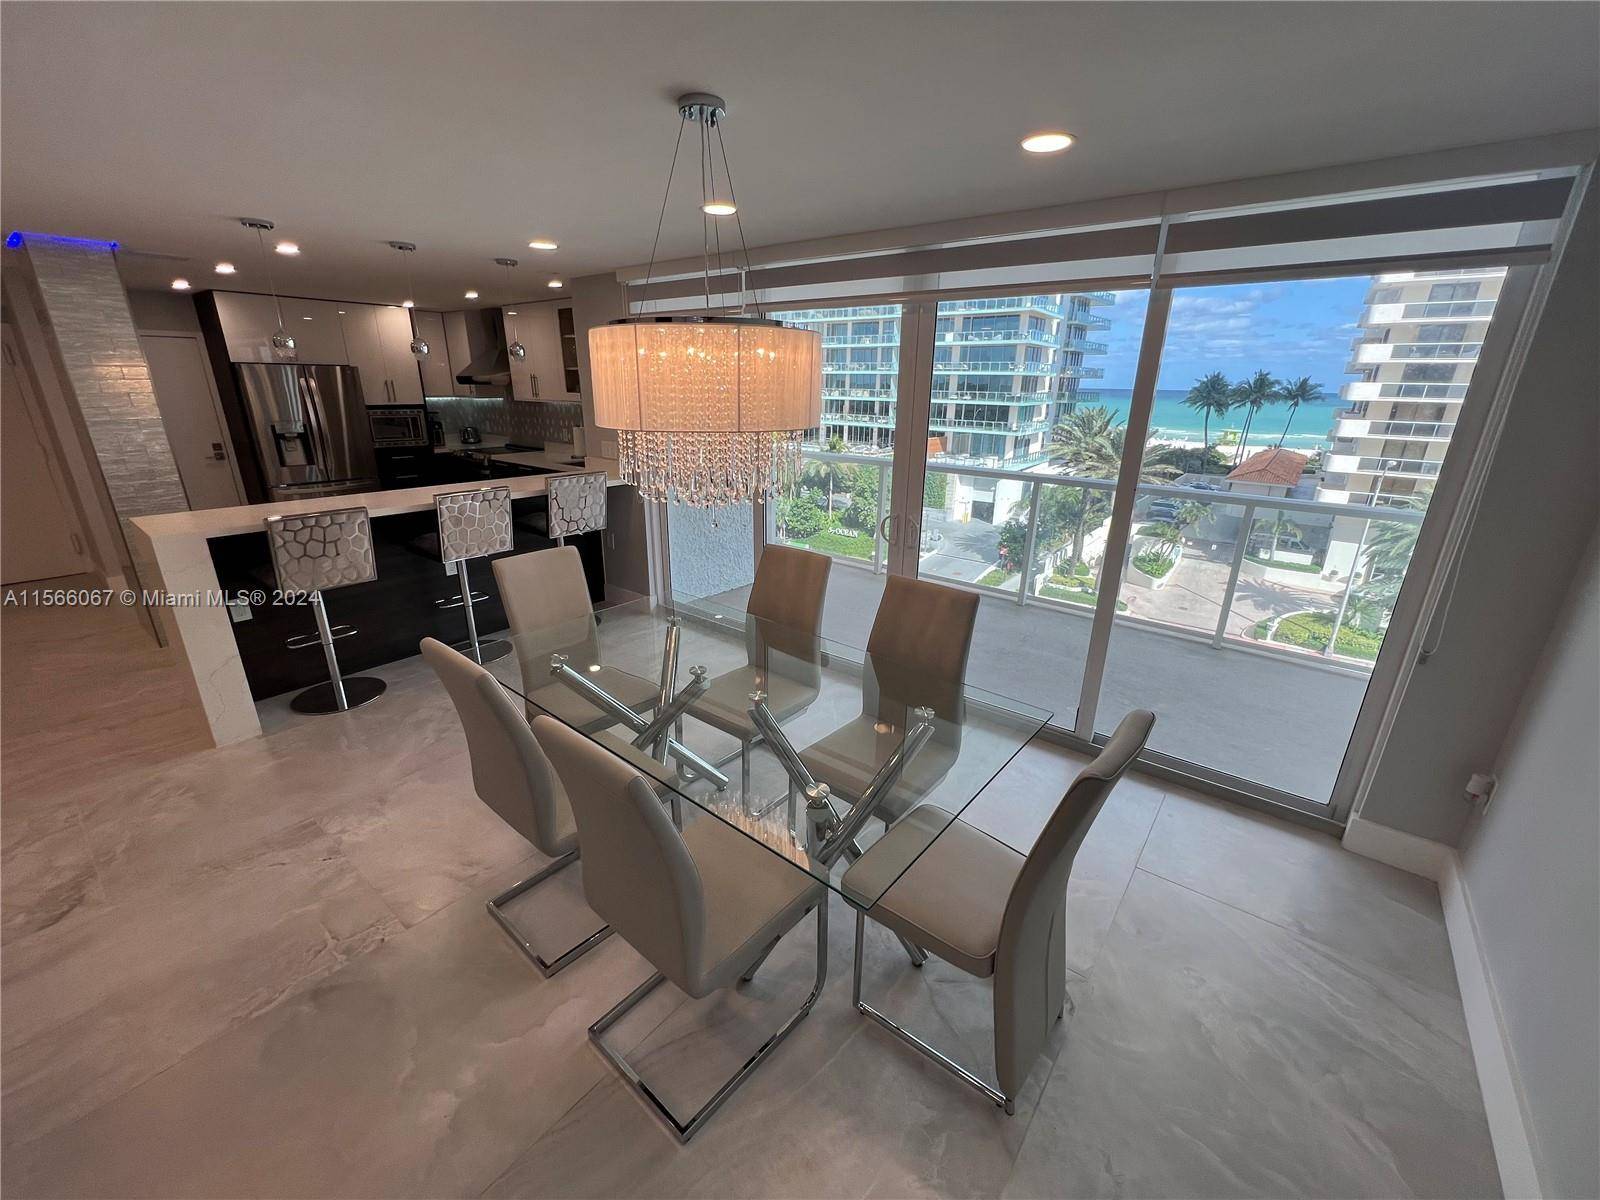 Beautifully remodeled spacious corner unit with partial ocean view located on Millionaire s Row.